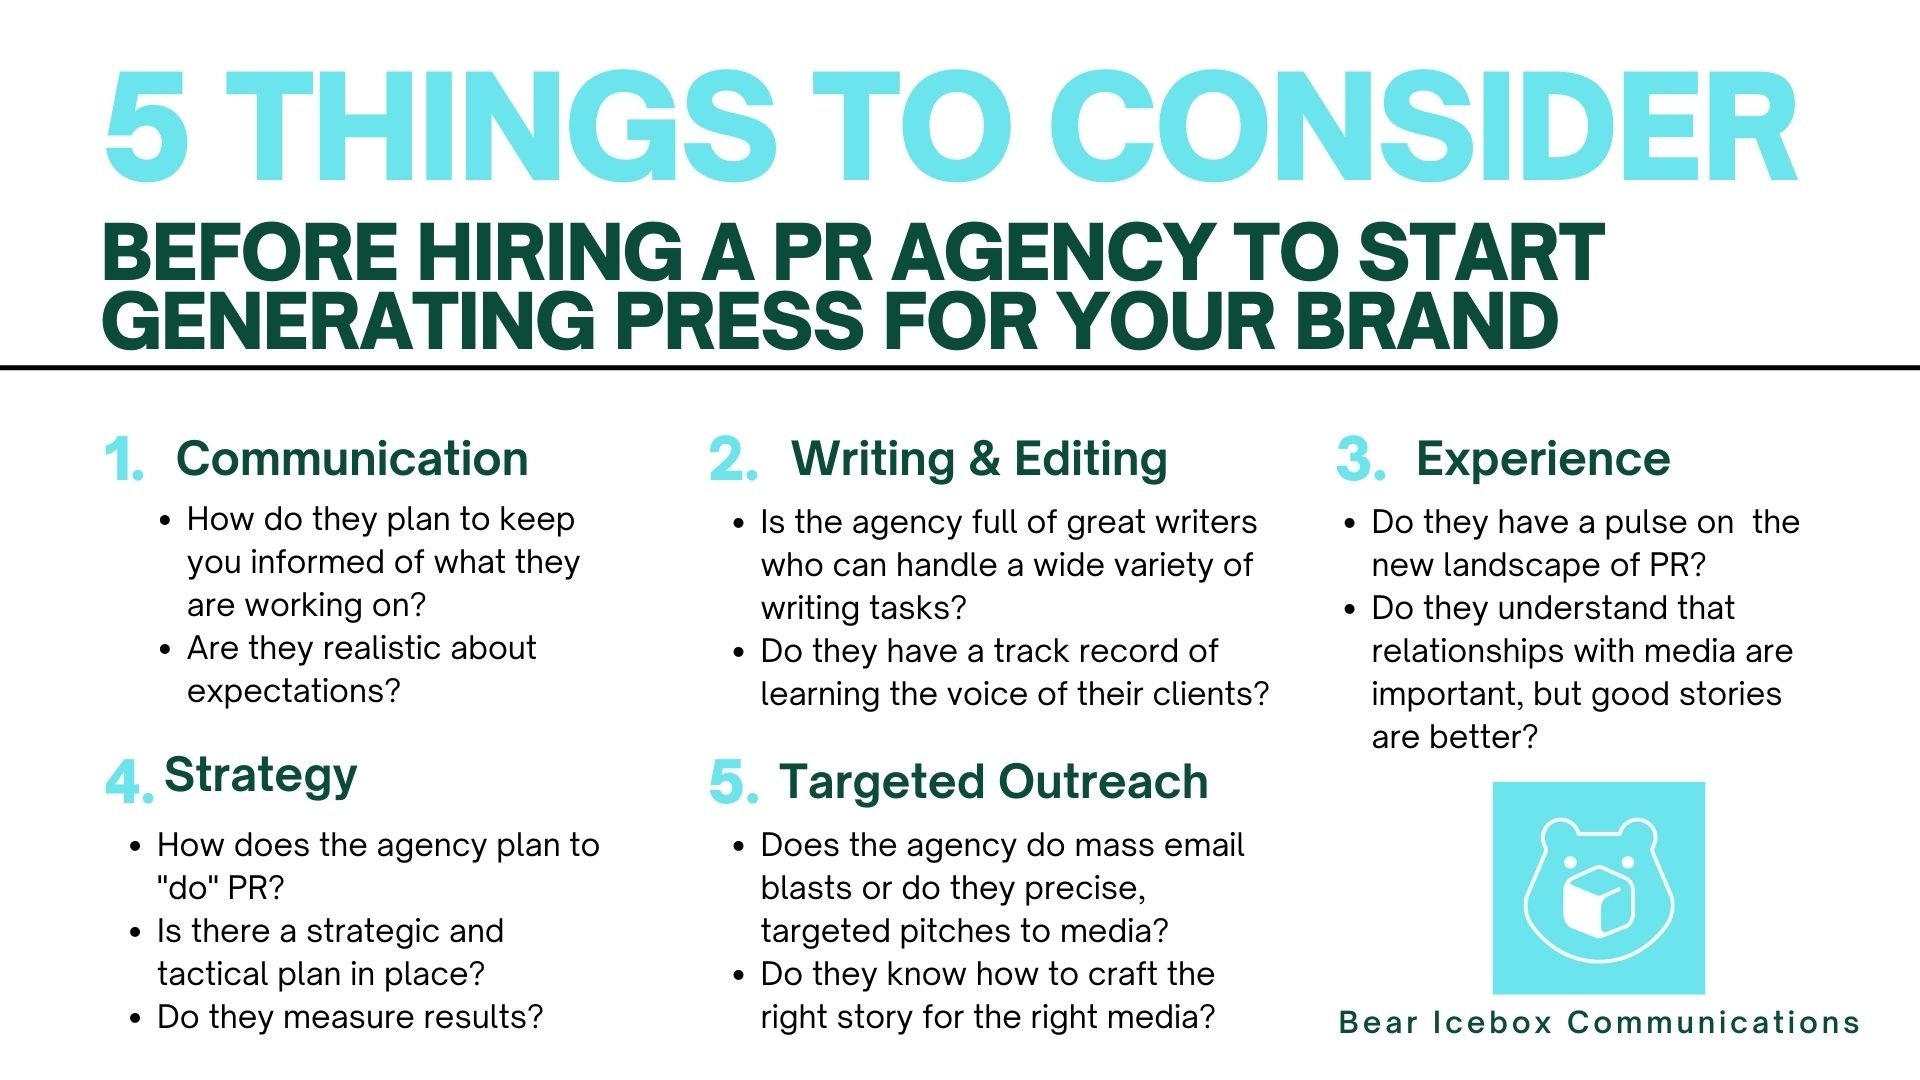 5 things to consider before hiring a PR agency.